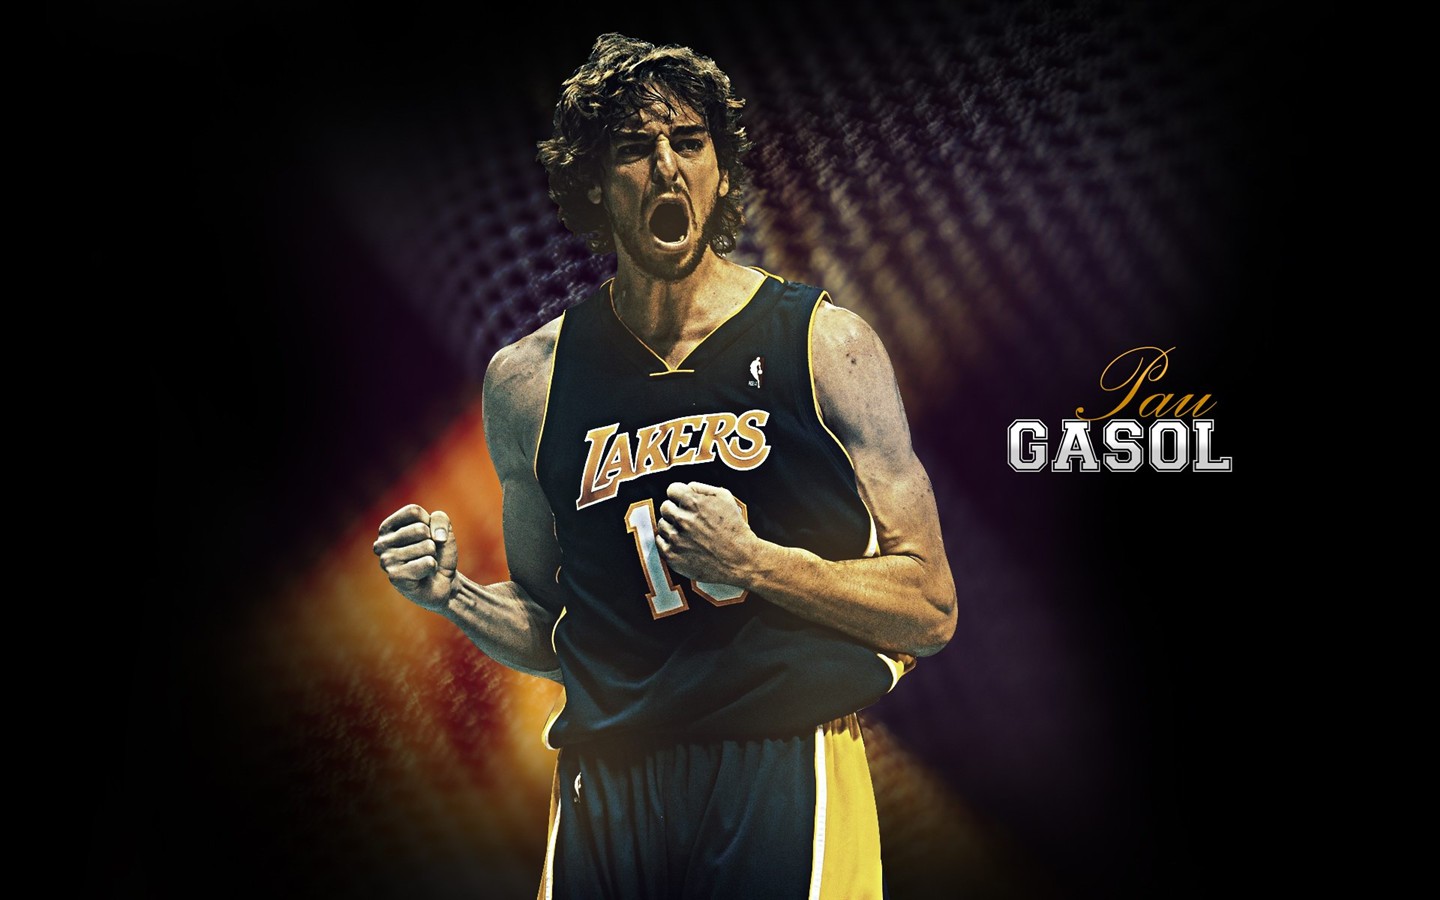 Los Angeles Lakers Official Wallpaper #20 - 1440x900